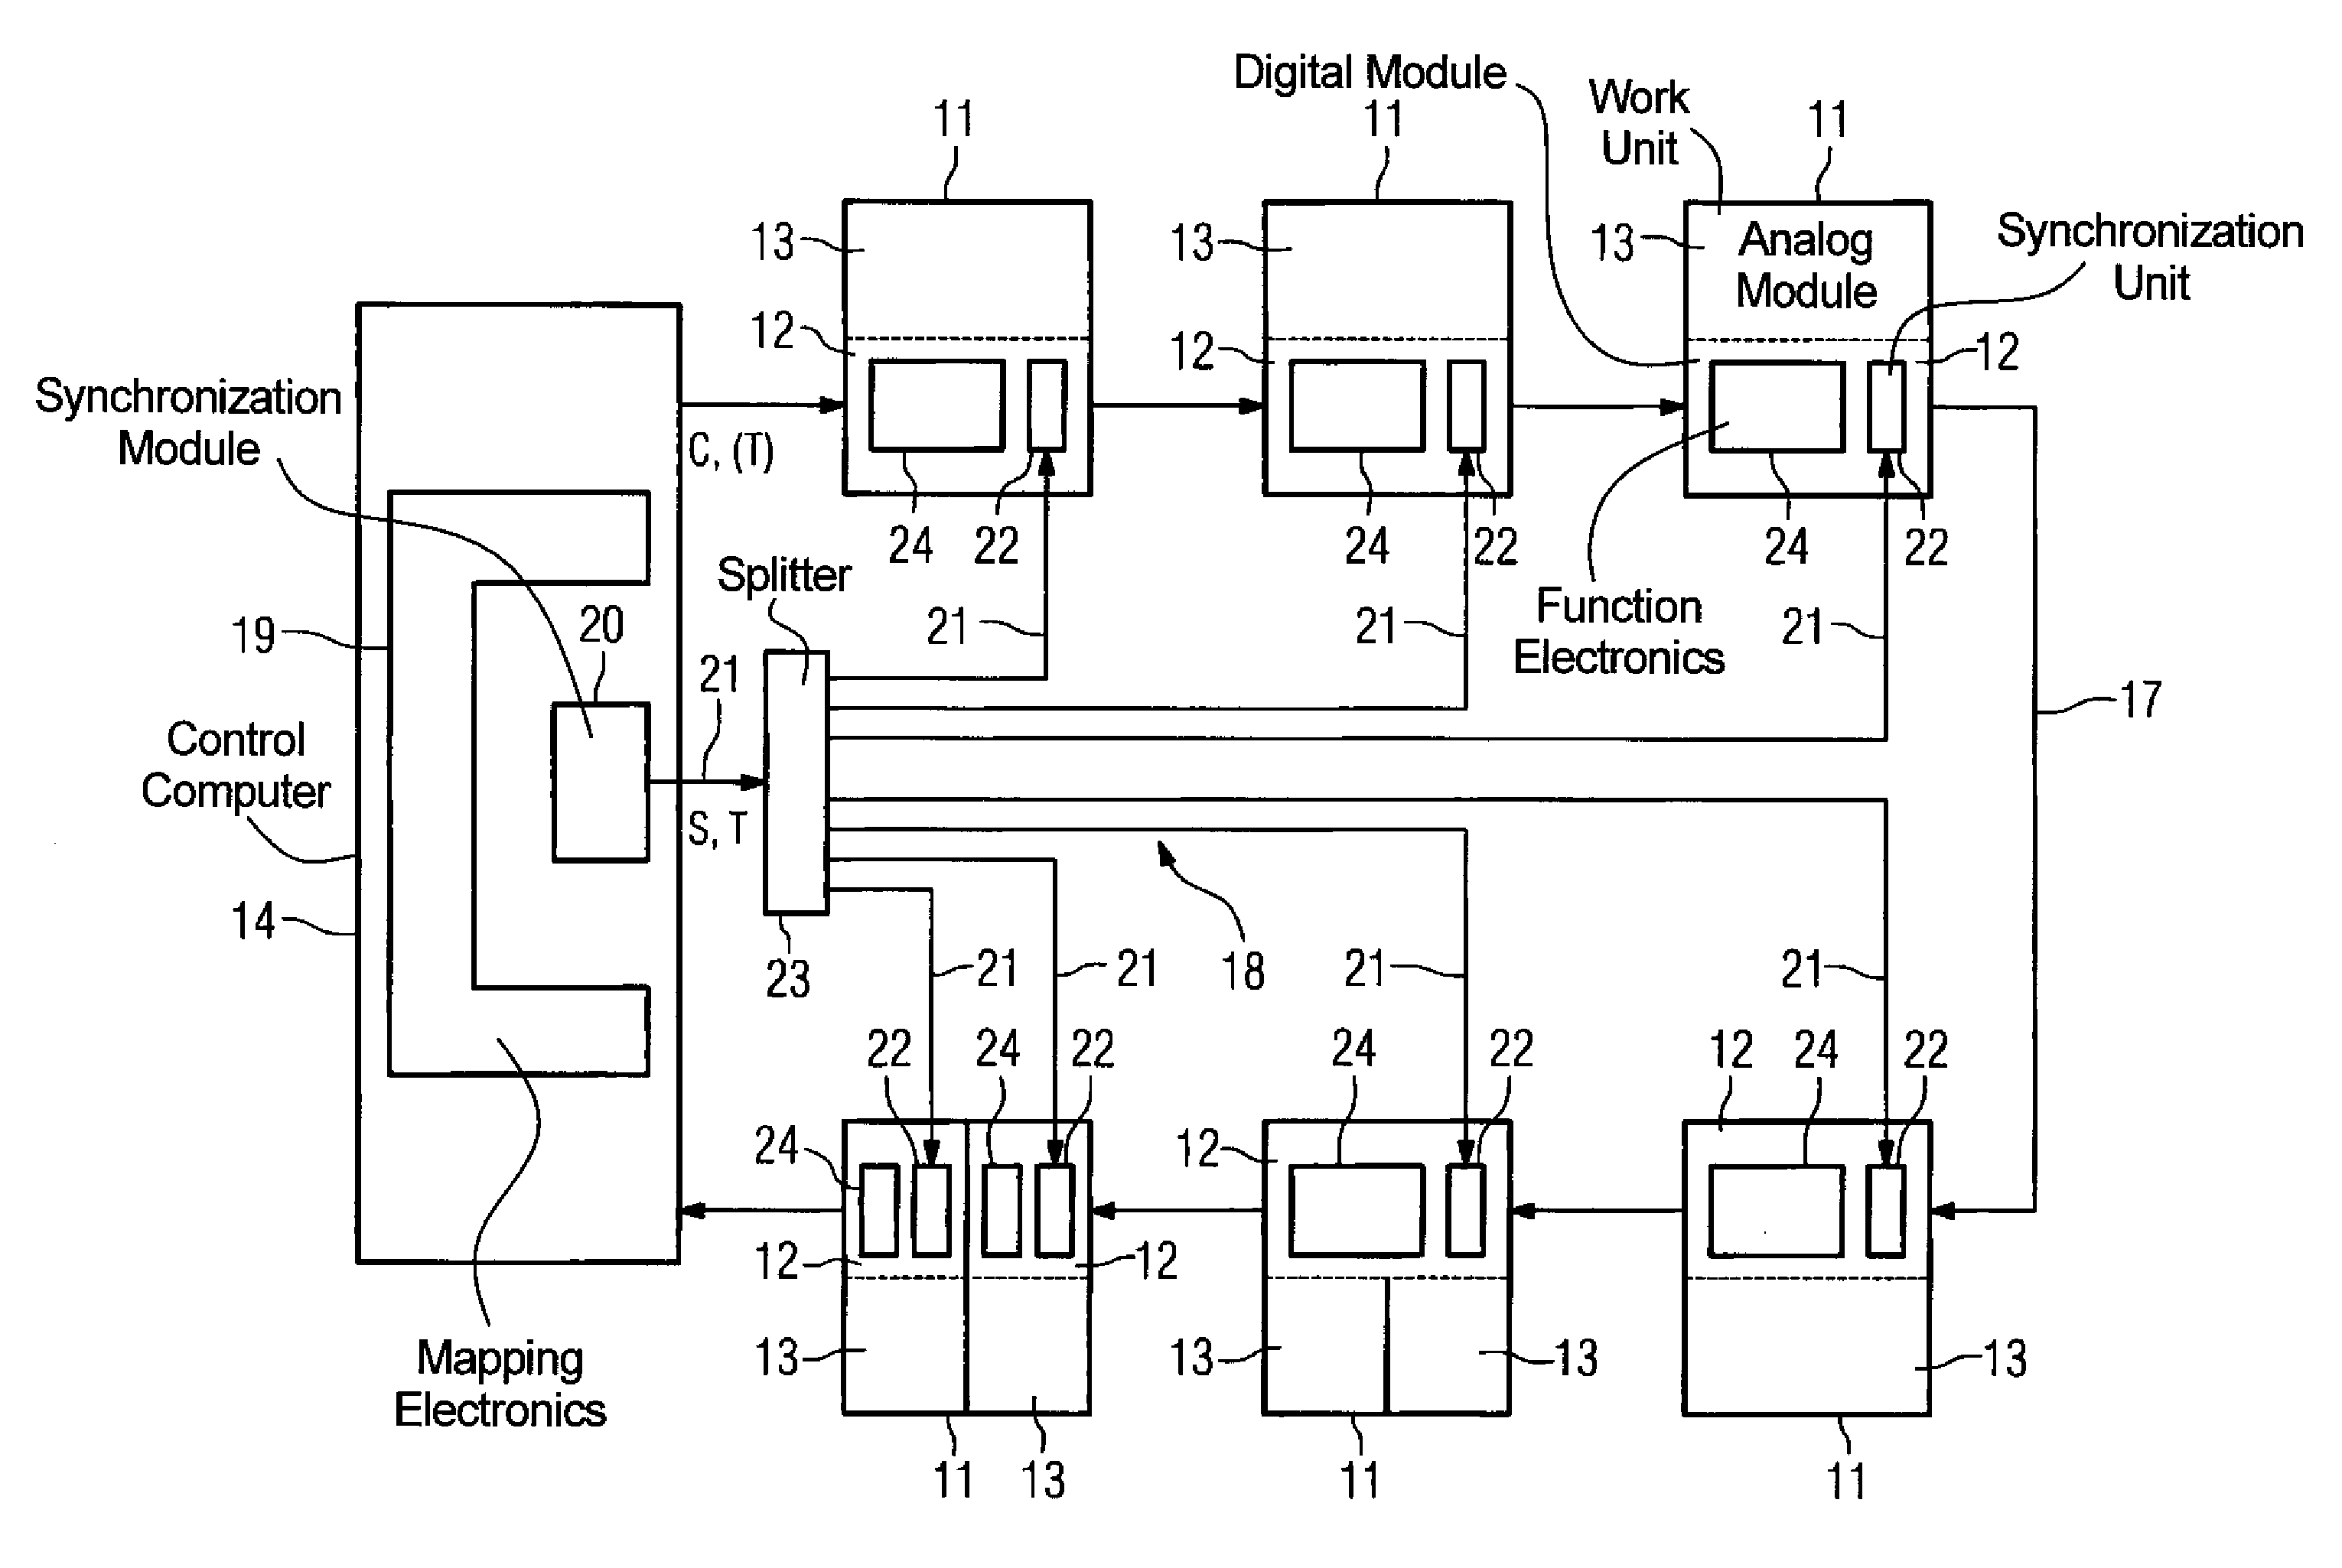 Magnetic resonance system with components allowing upgrade capability